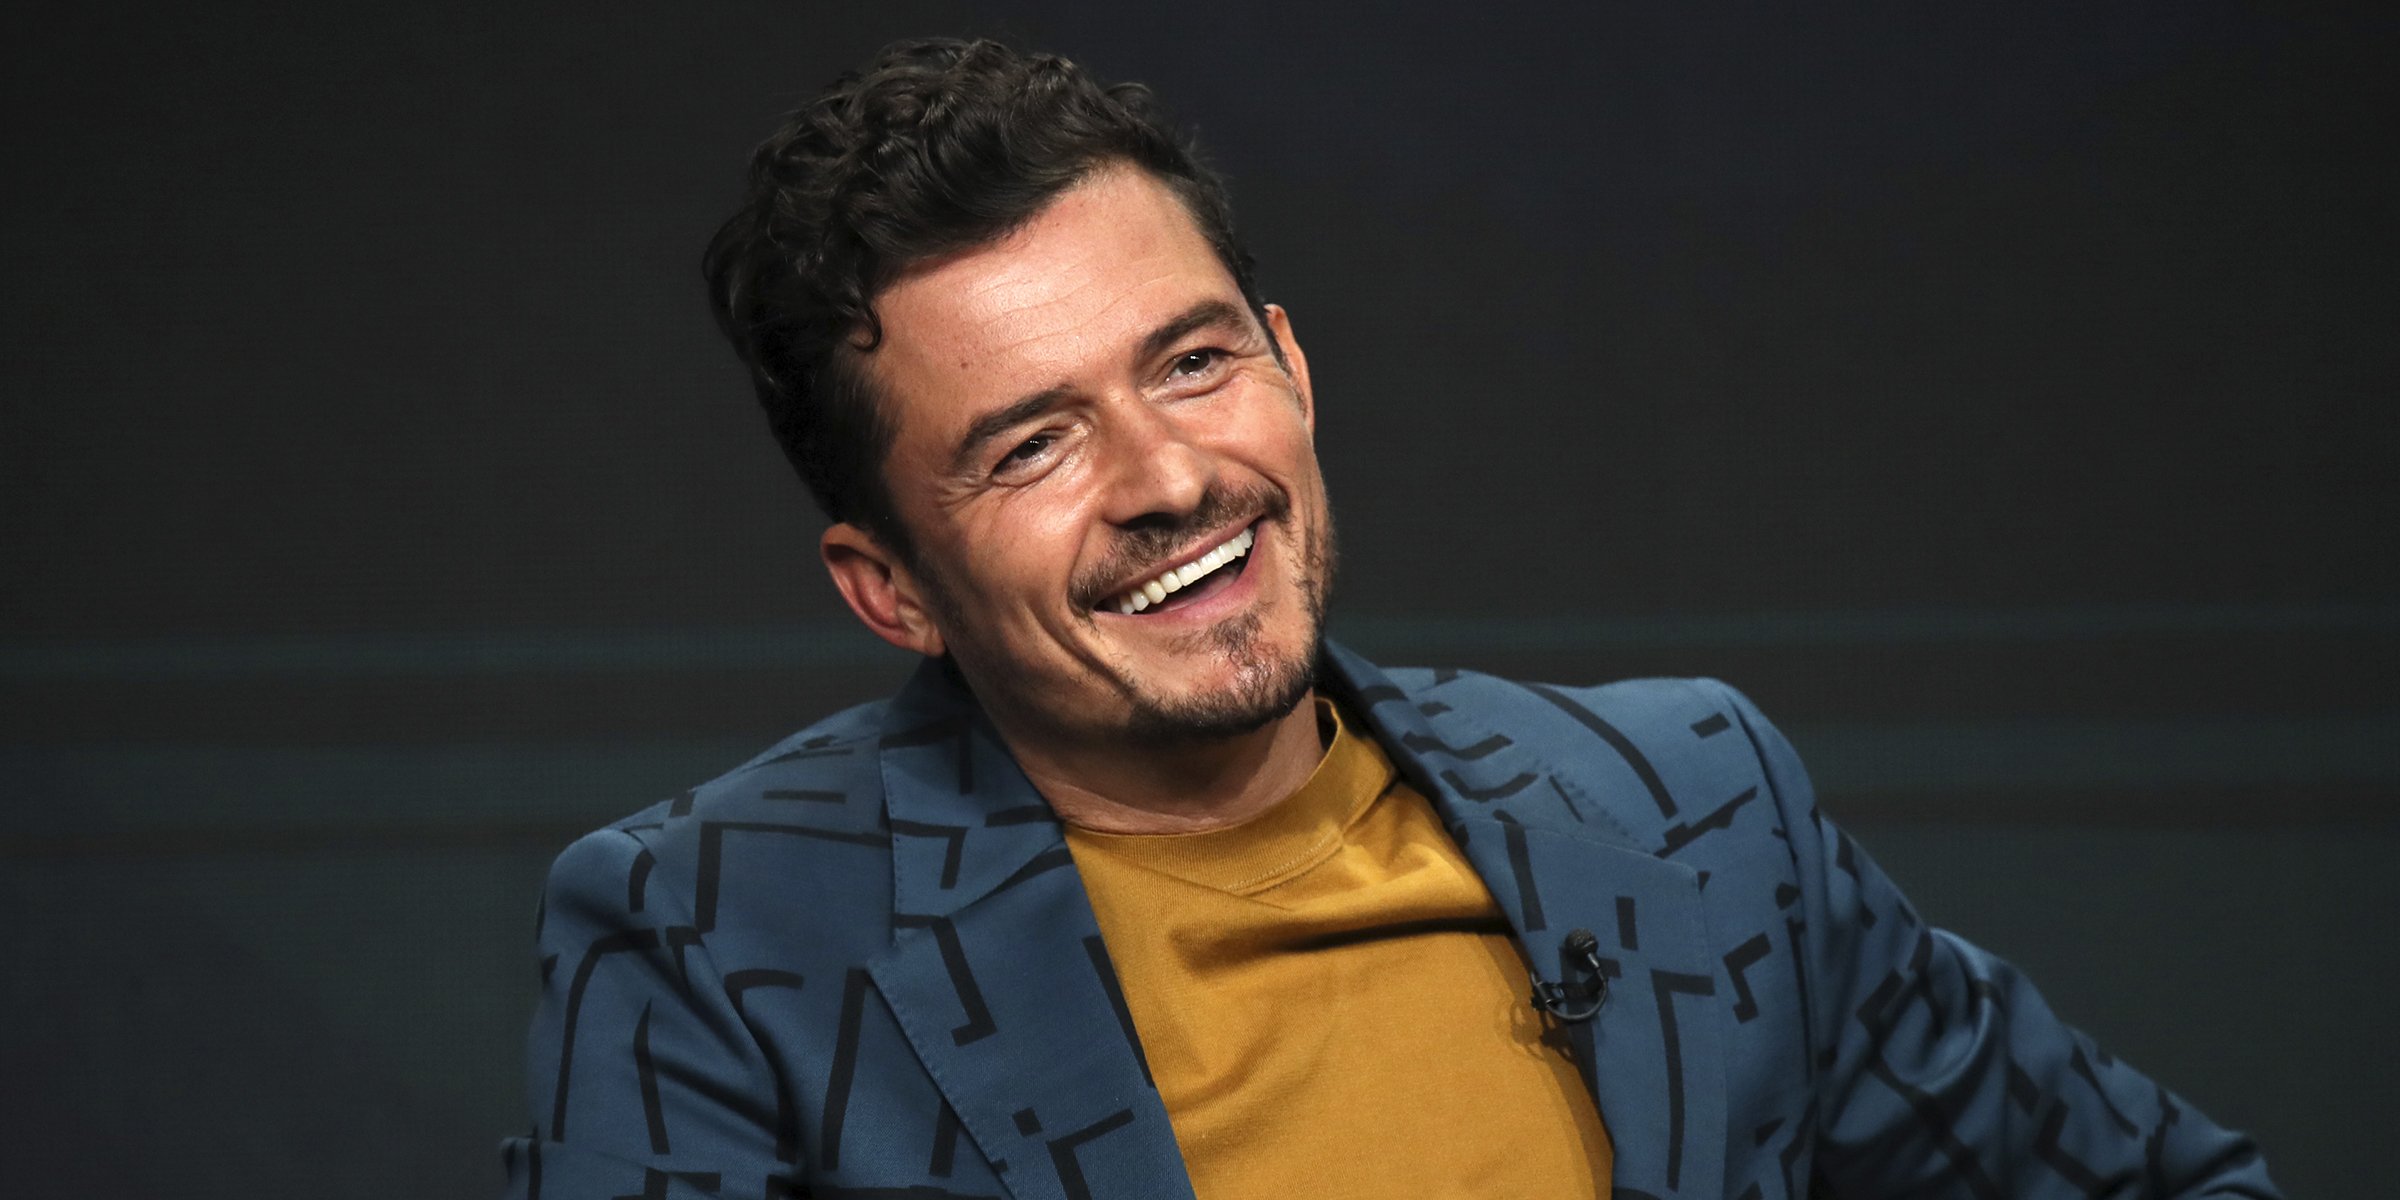 Orlando Bloom. | Source: Getty Images